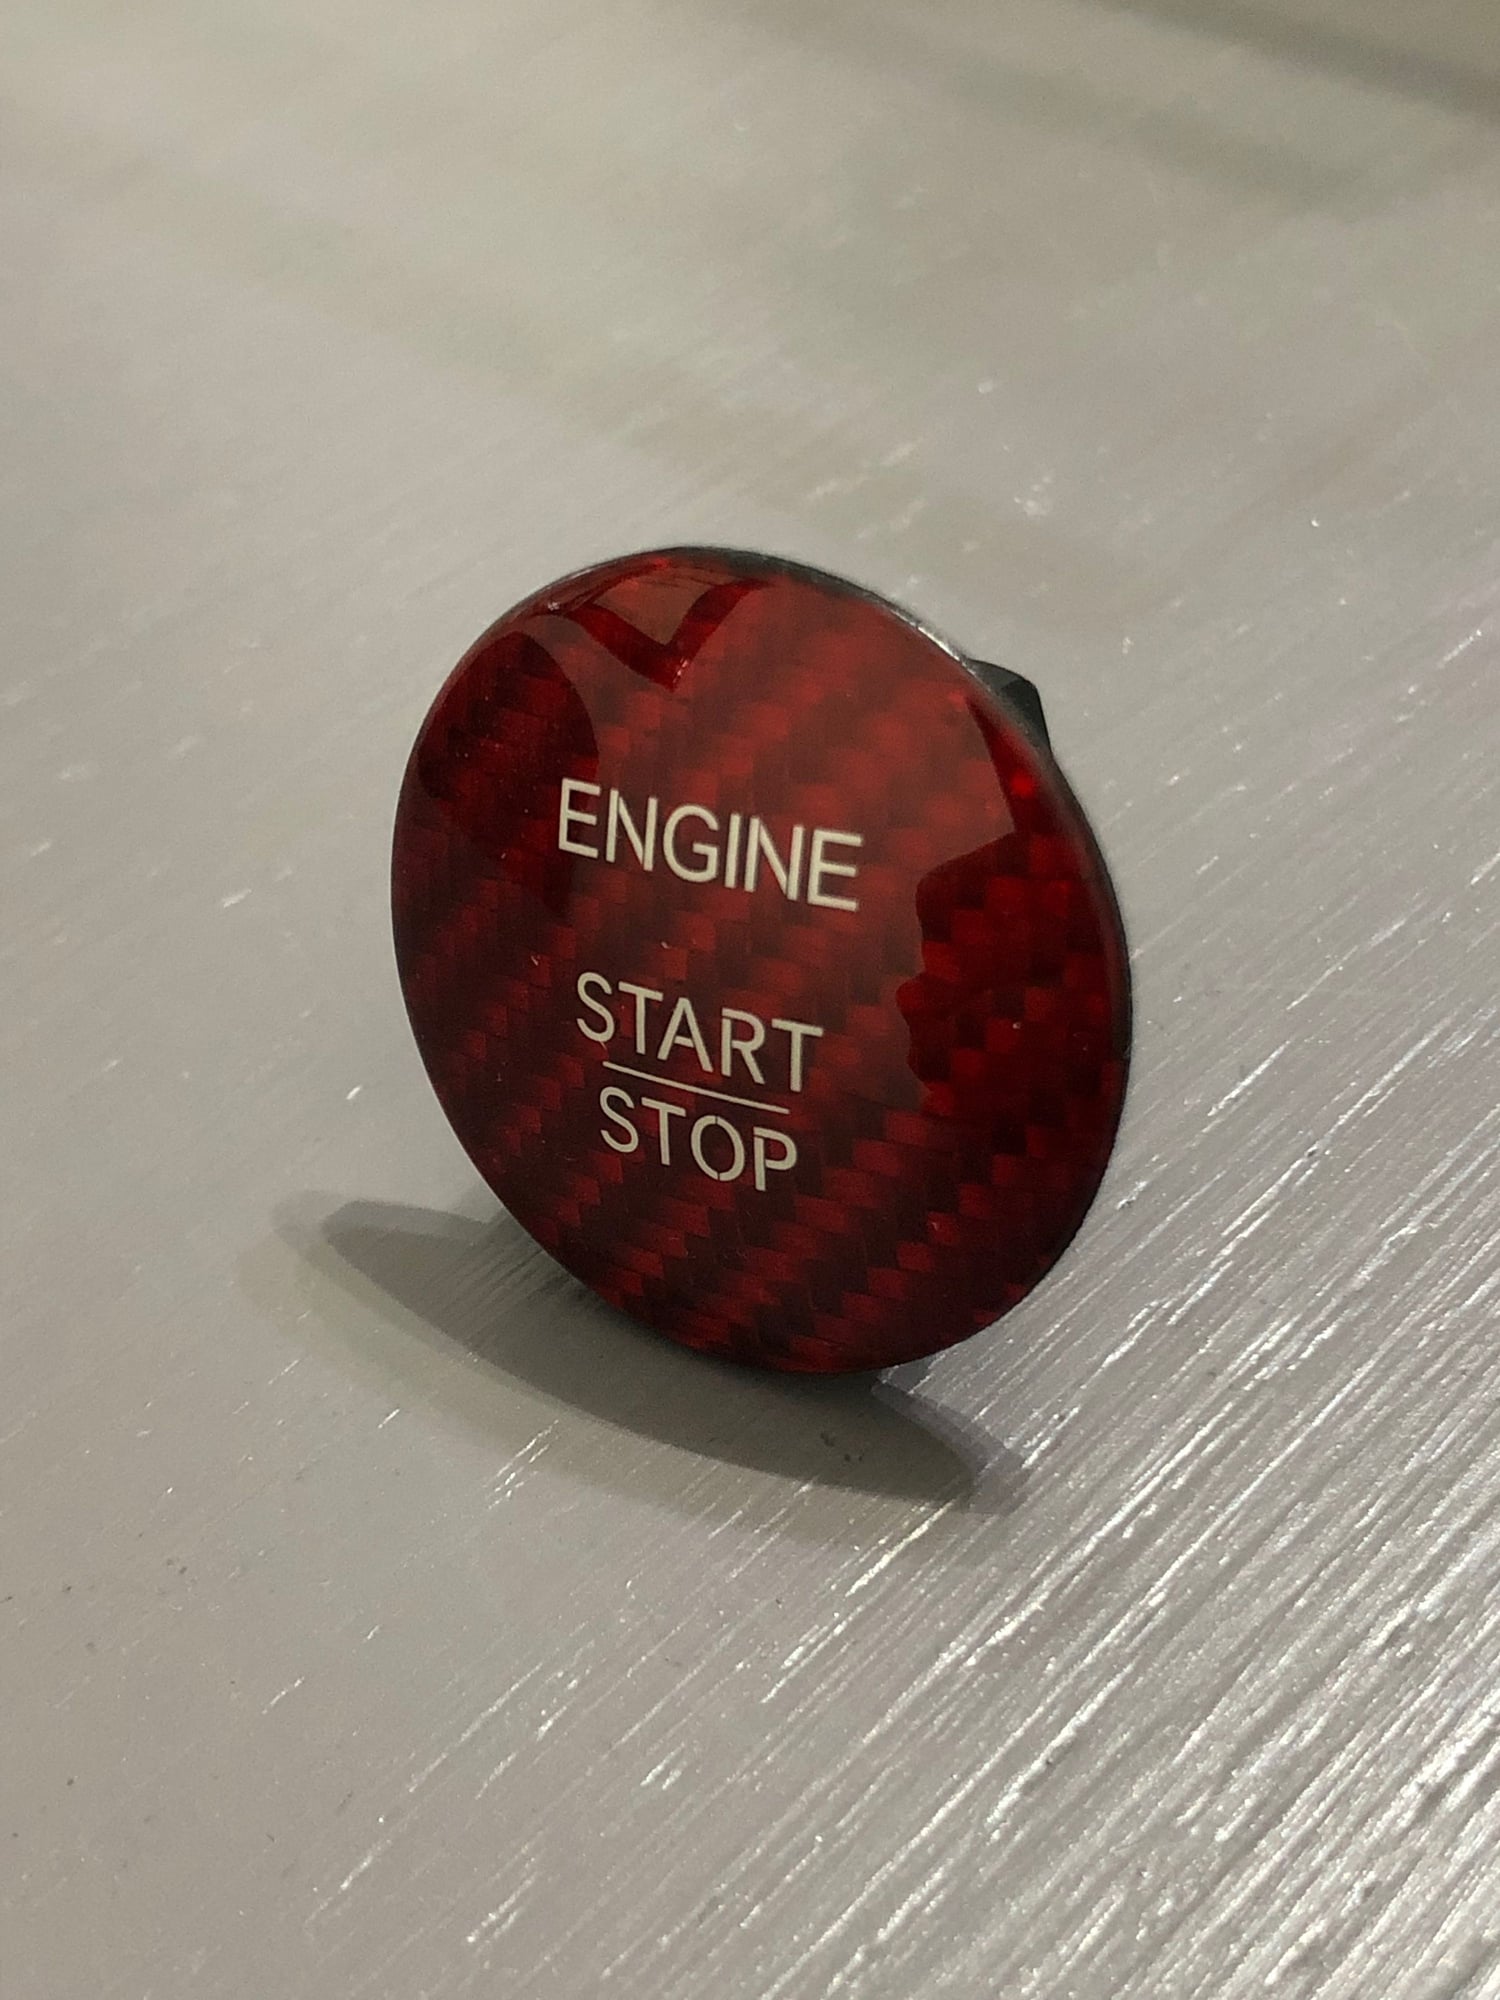 Interior/Upholstery - Red Carbon Fiber Push/Start Button by Macarbon - New - Peoria, IL 61615, United States